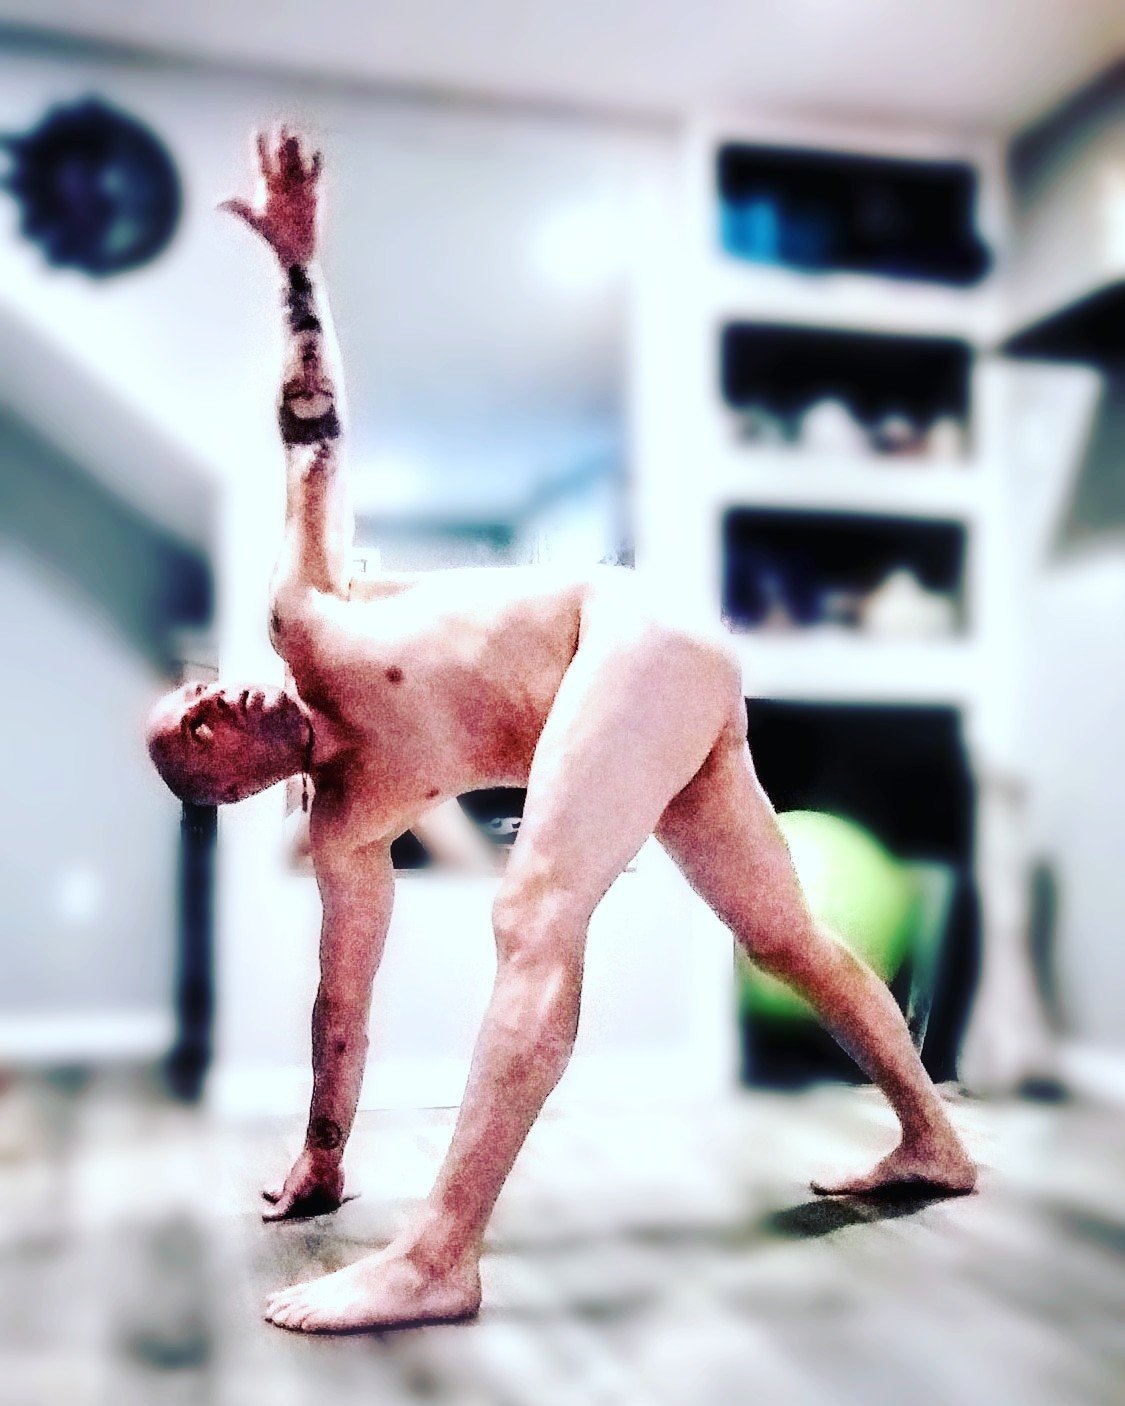 Shared Photo by ArtOfNakedYoga with the username @ArtOfNakedYoga, who is a verified user,  September 8, 2019 at 12:38 PM. The post is about the topic Nudists and Naturists and the text says 'anyone else like to pratice yoga naked?'